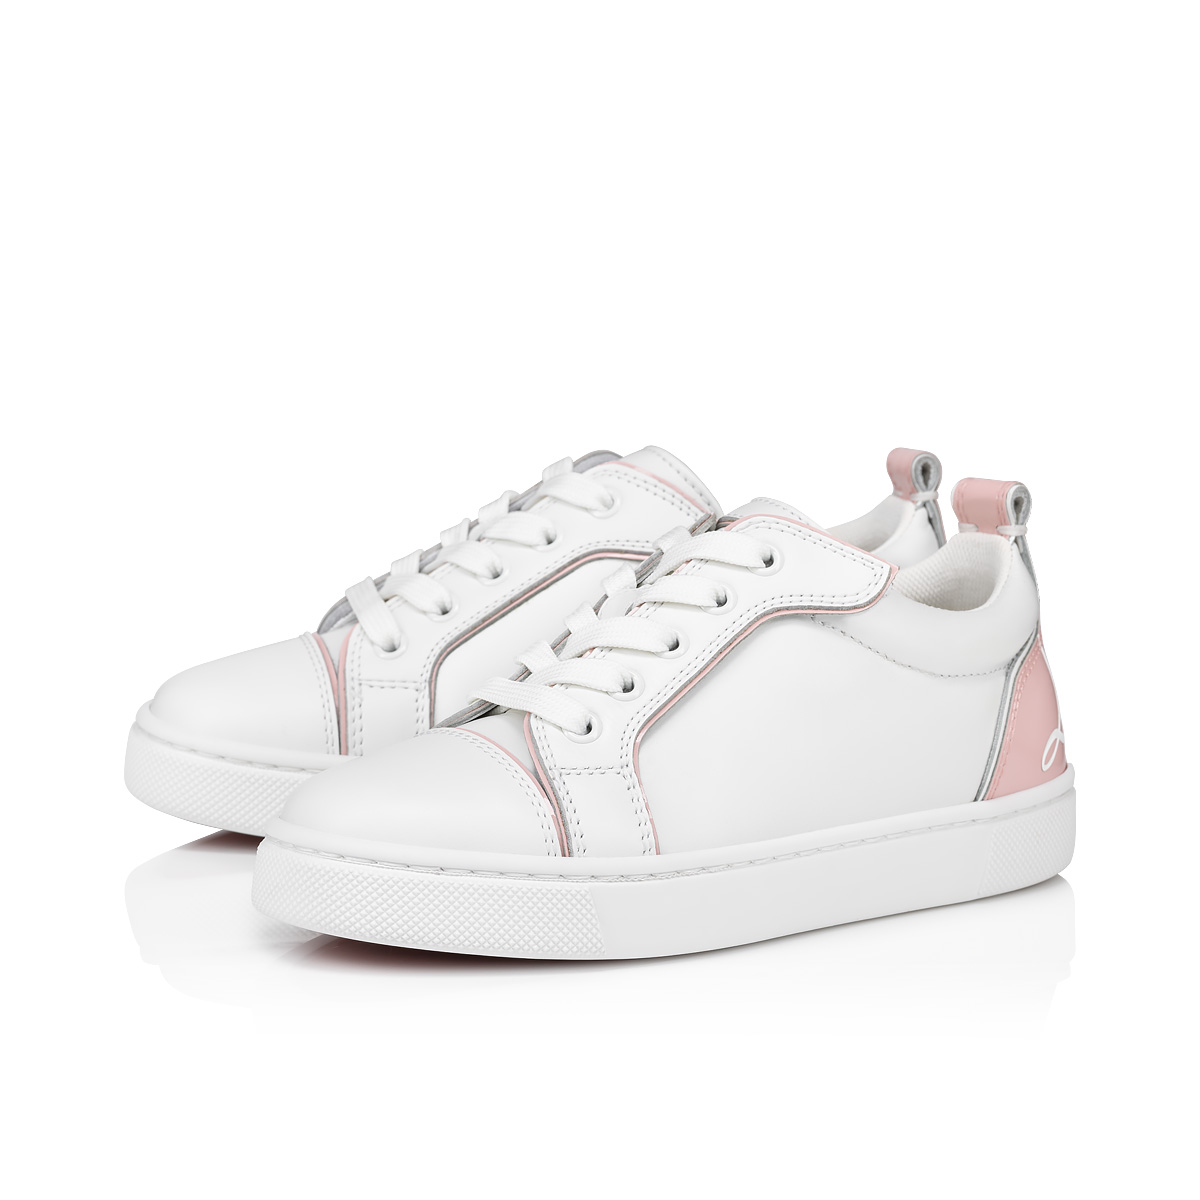 Funnyto - Sneakers - Calf leather and patent calf leather - Rosy - Kids ...